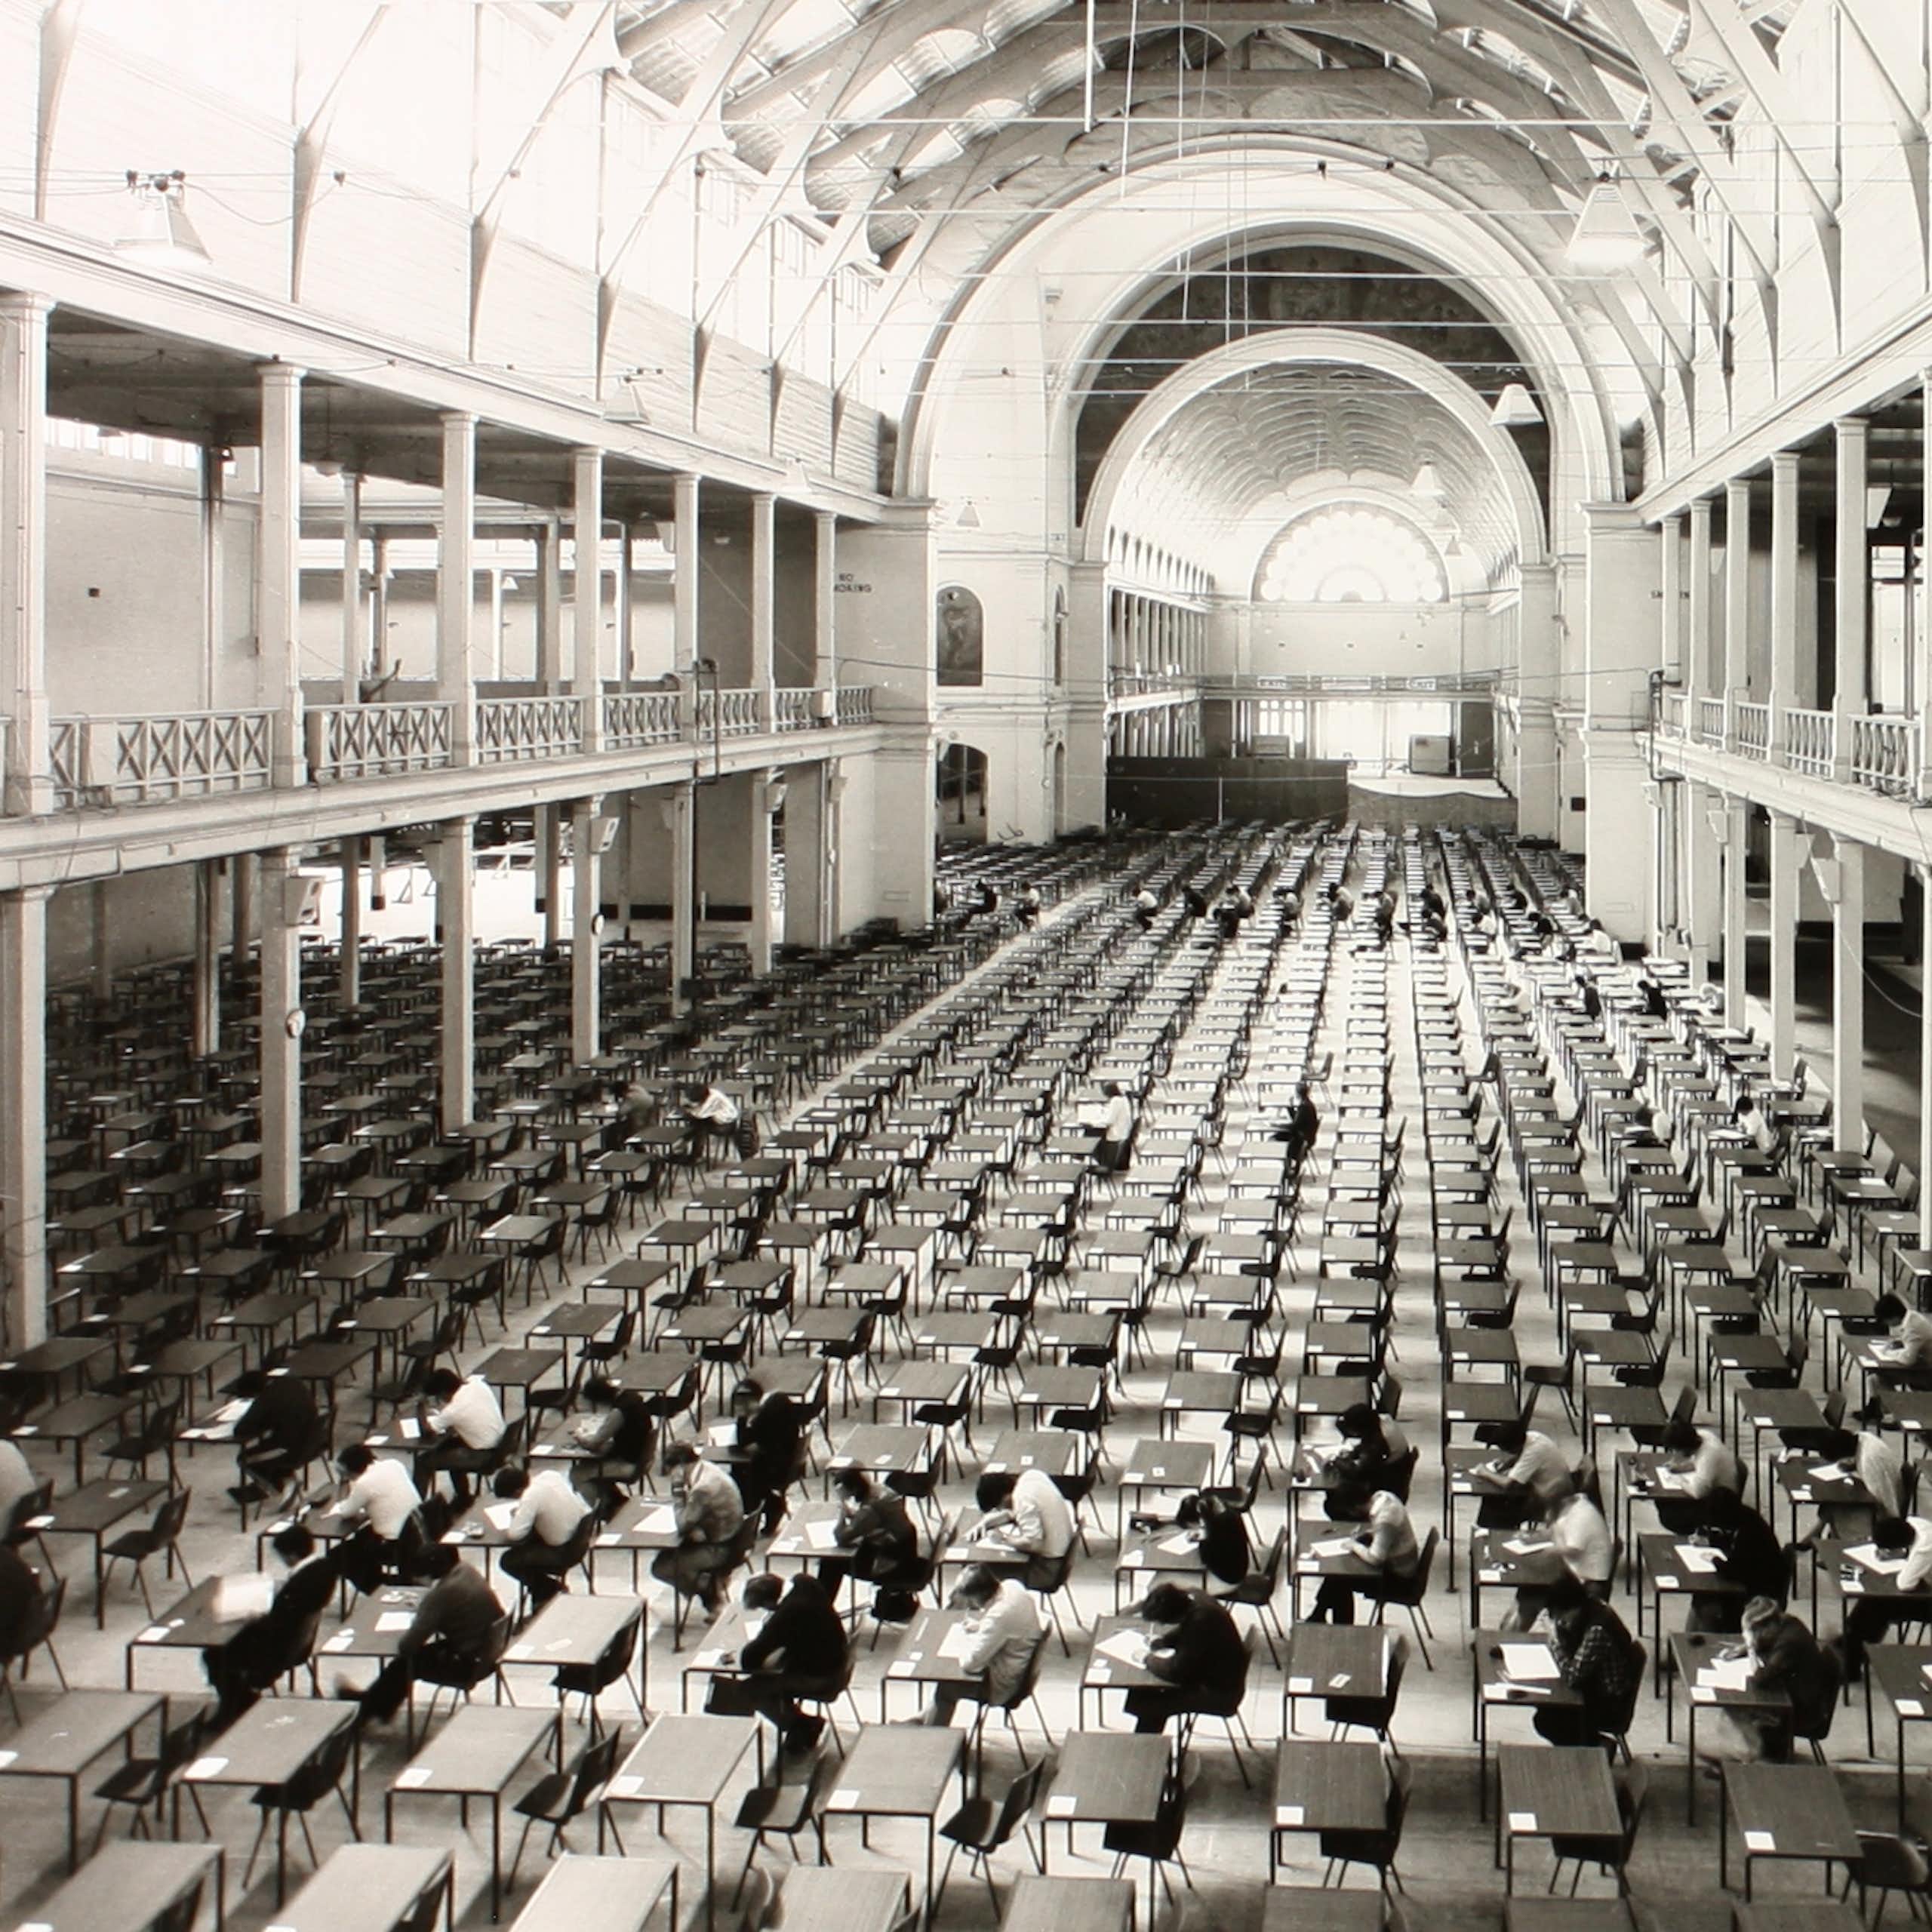 Large room with rows of tables and chairs for an examination